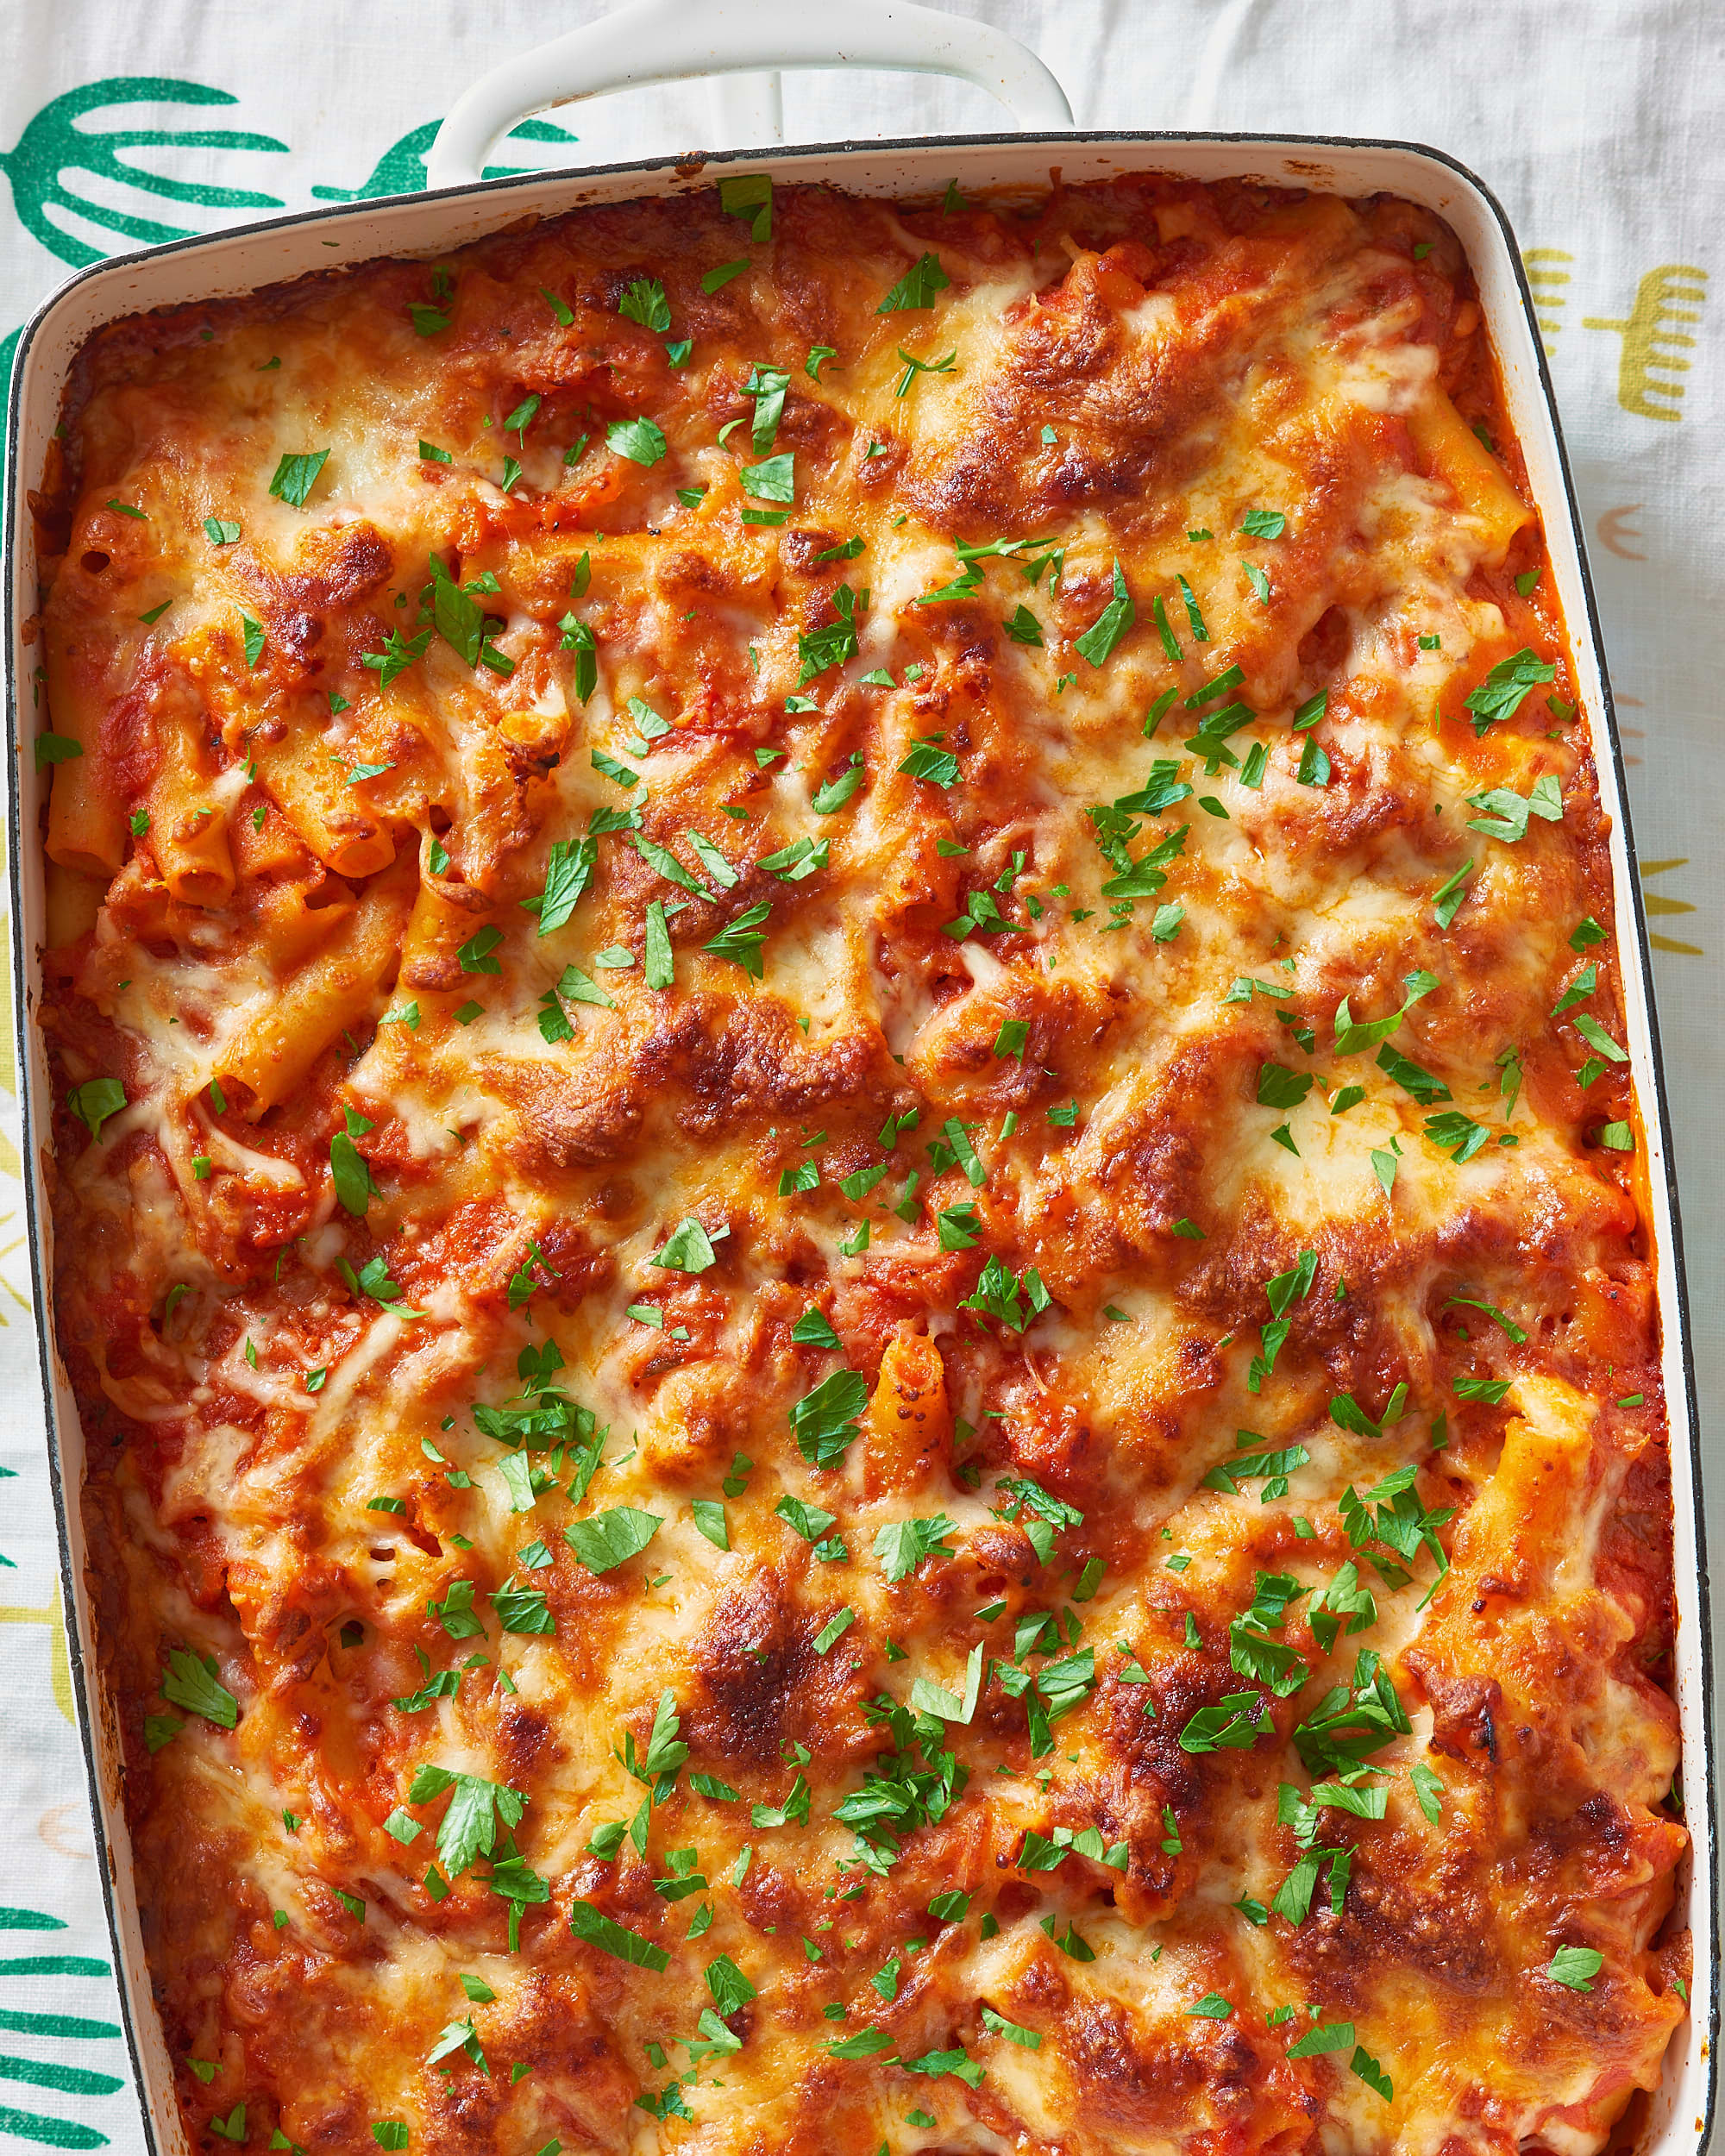 How To Make An All Star Baked Ziti Kitchn,Flower Pink Depression Glass Patterns